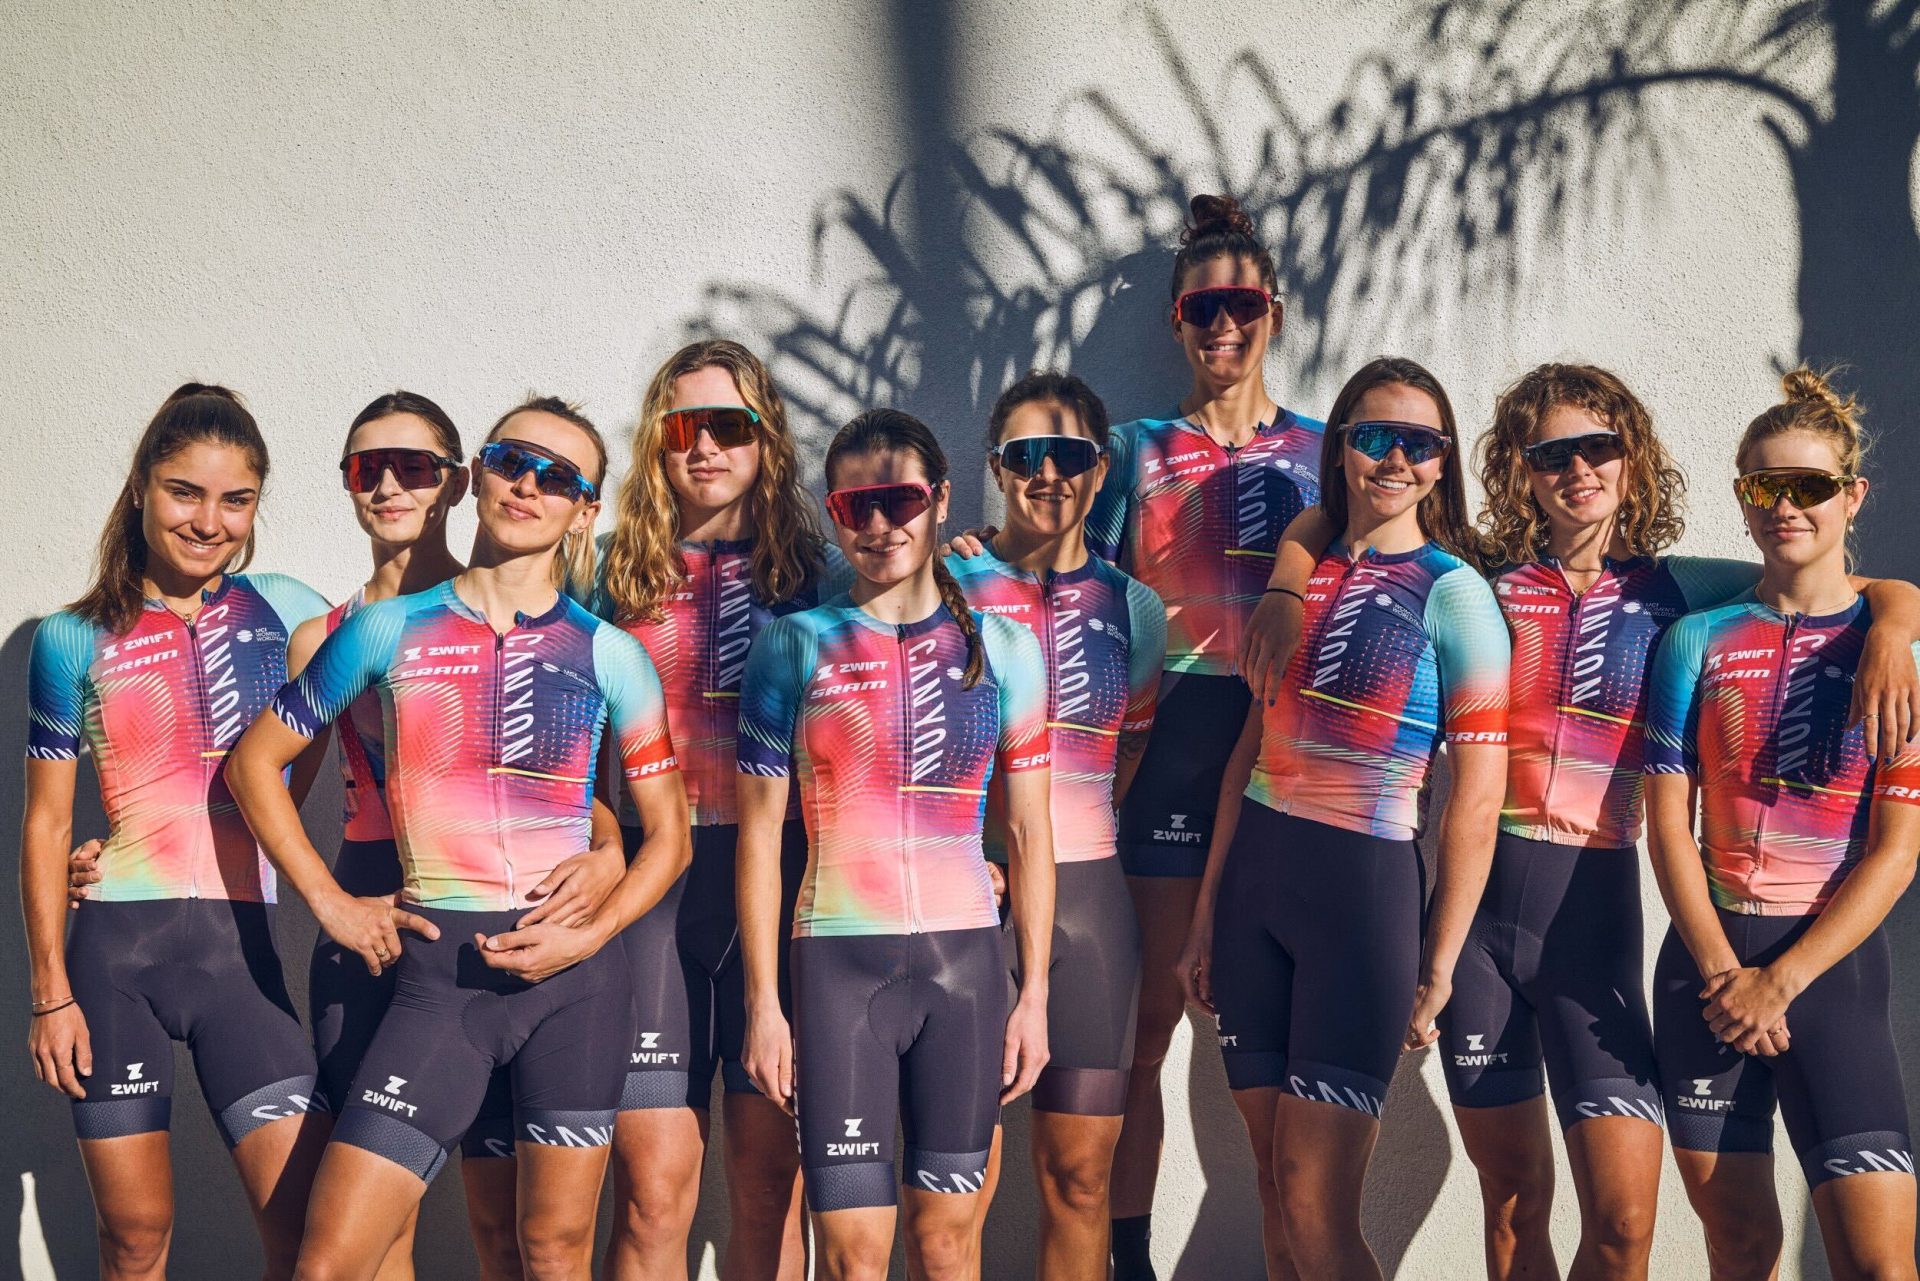 The Canyon-Sram team models their new kit outside a coffee shop in California. The jerseys feature afade design with light blue shoulders set against a dark blue to pink fade across the kit, ending in a greenish yellow at the lower right hem.